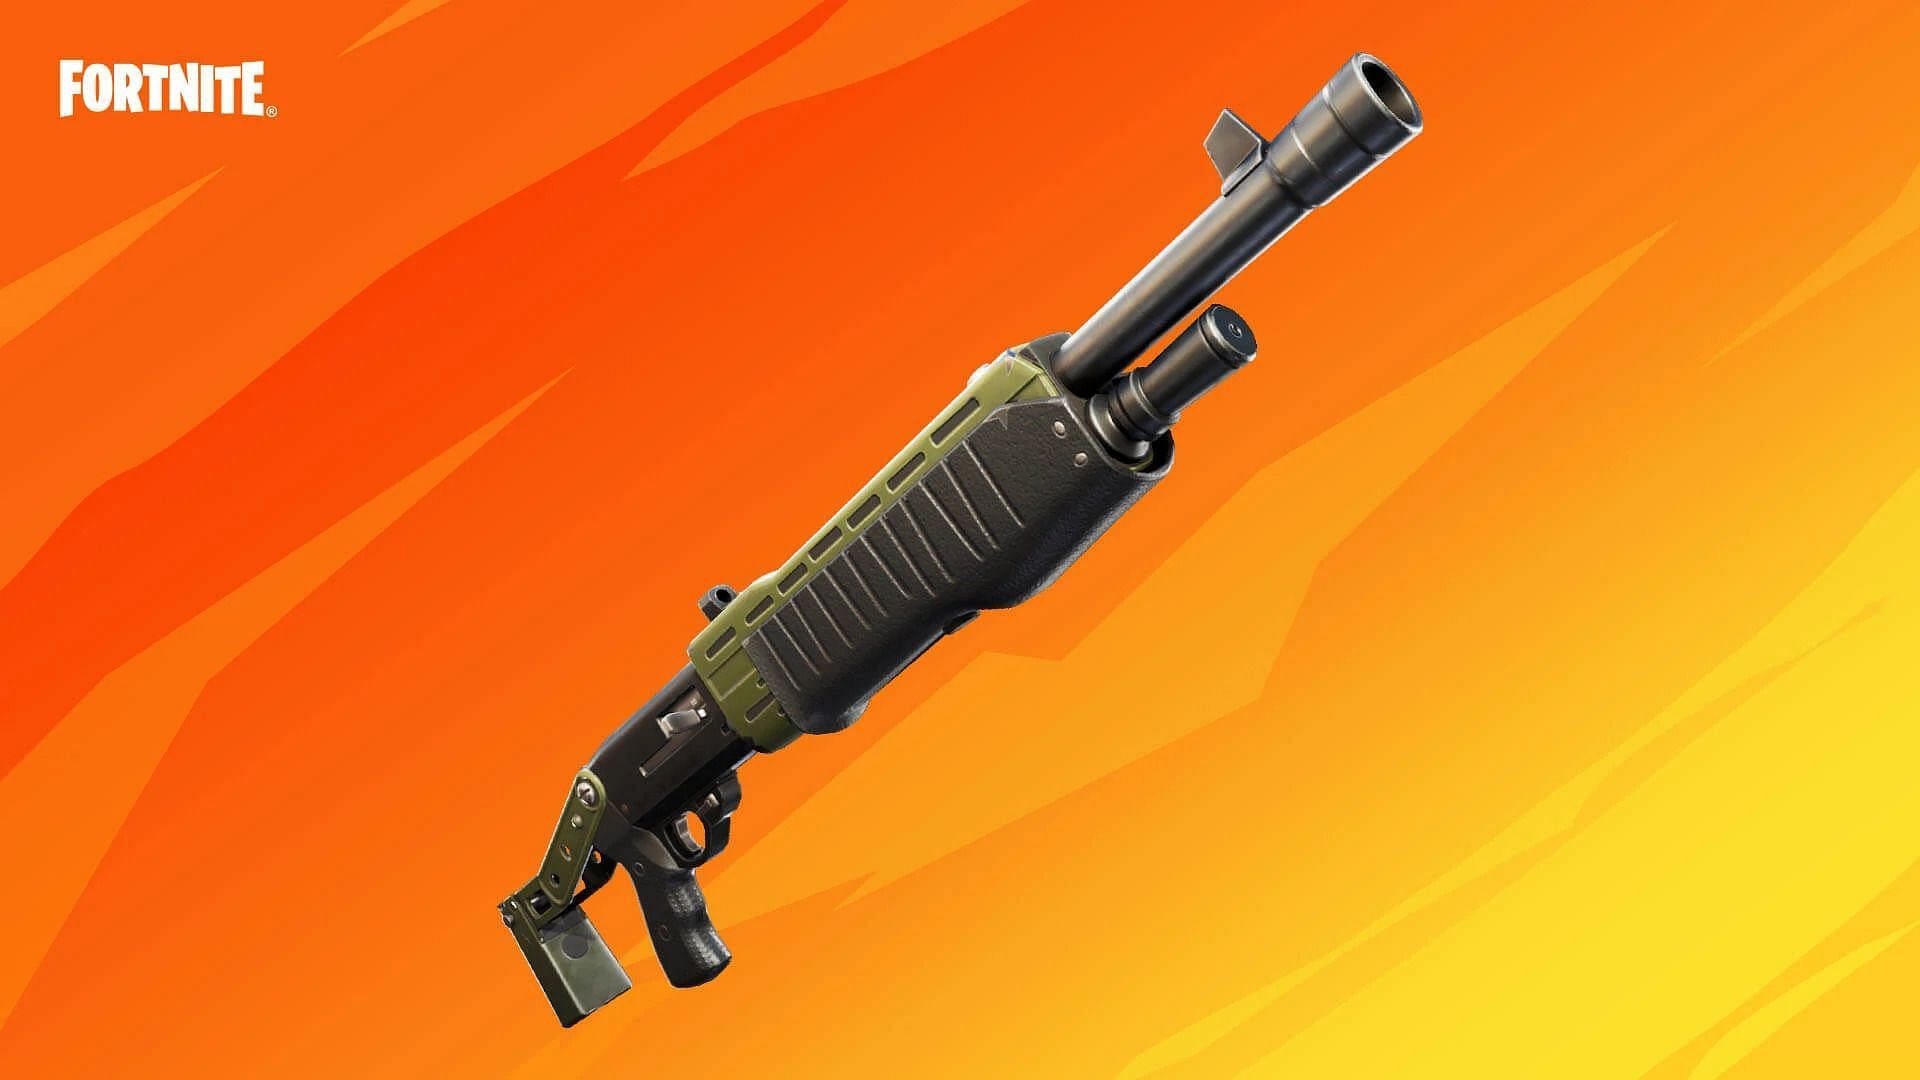 A popular weapon is making a return to Fortnite in the latest season (Image via Epic Games)